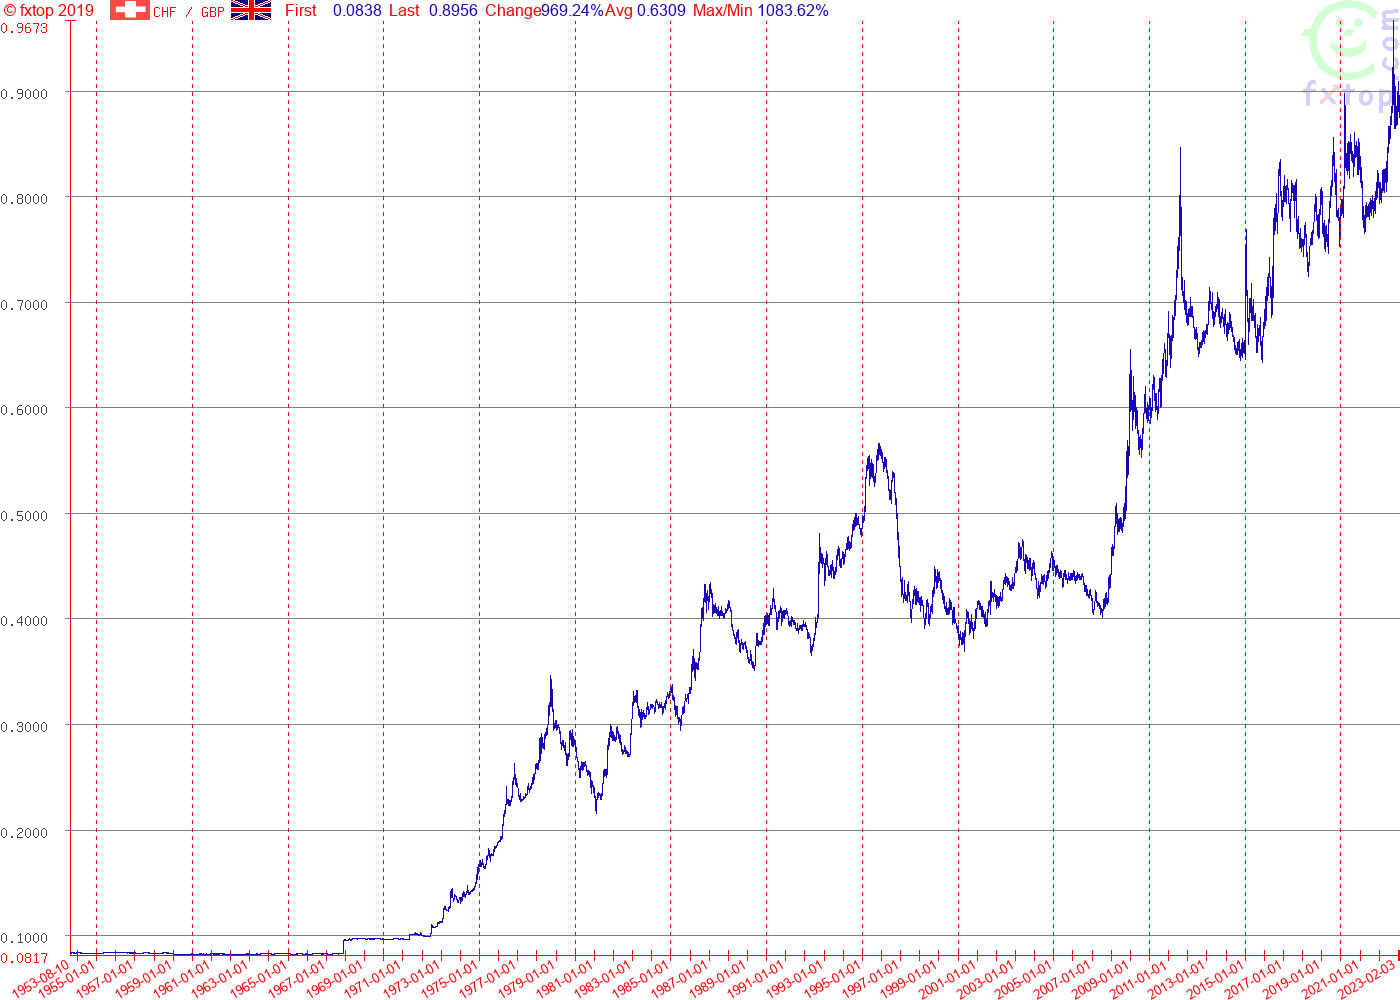 Graph of the exchange rate of the Swiss franc (CHF) against the pound sterling (GBP) 1953-2023.